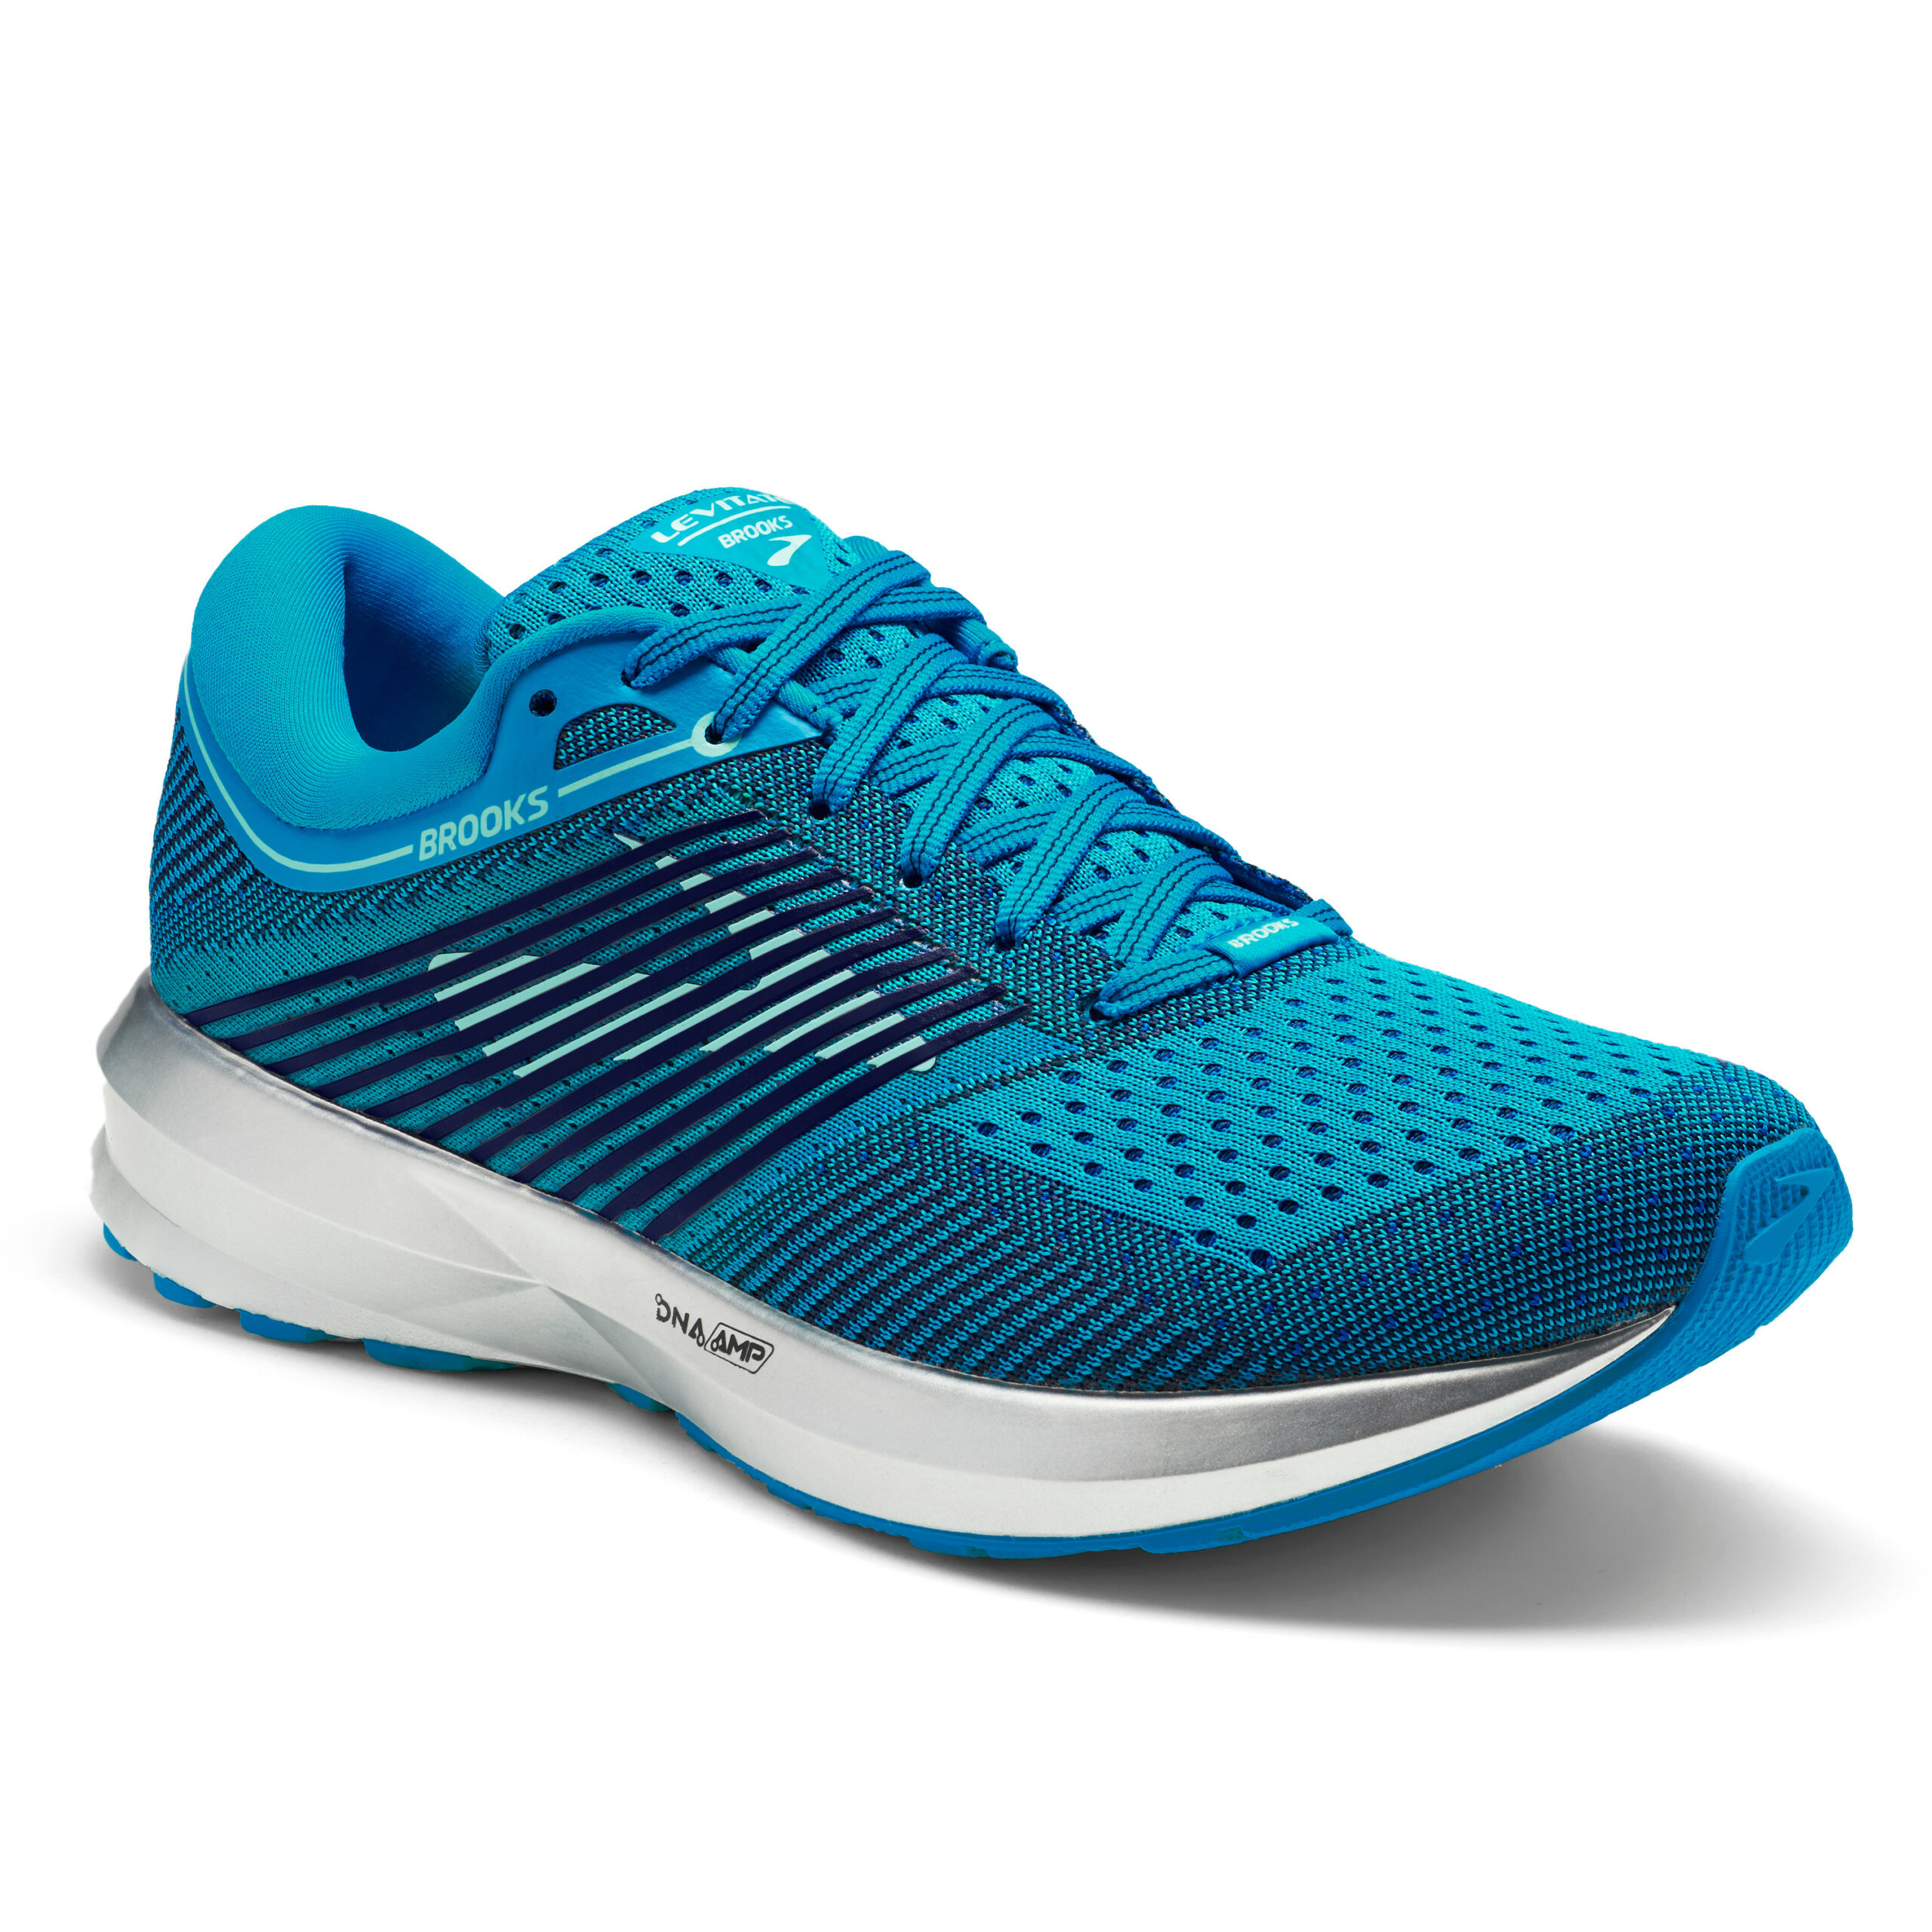 Can this new running shoe make novice runners faster? | Popular Science